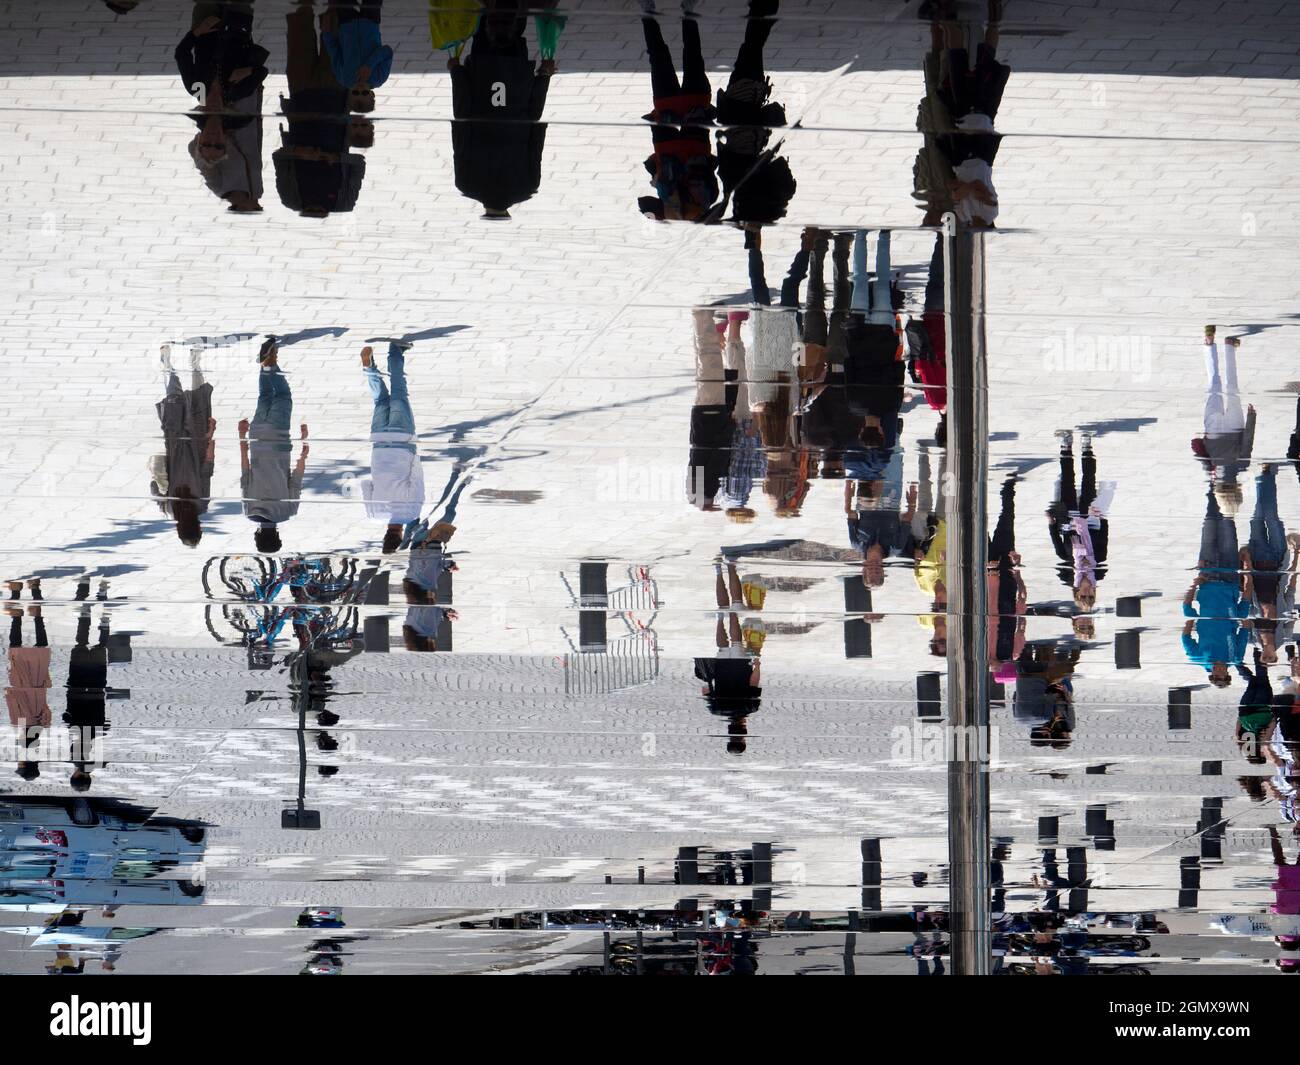 Marseilles, France - 20 June 2013; Lots of people in view, but upside down.The Ombriere in Marseilles Old Port is a blade of reflective stainless stee Stock Photo